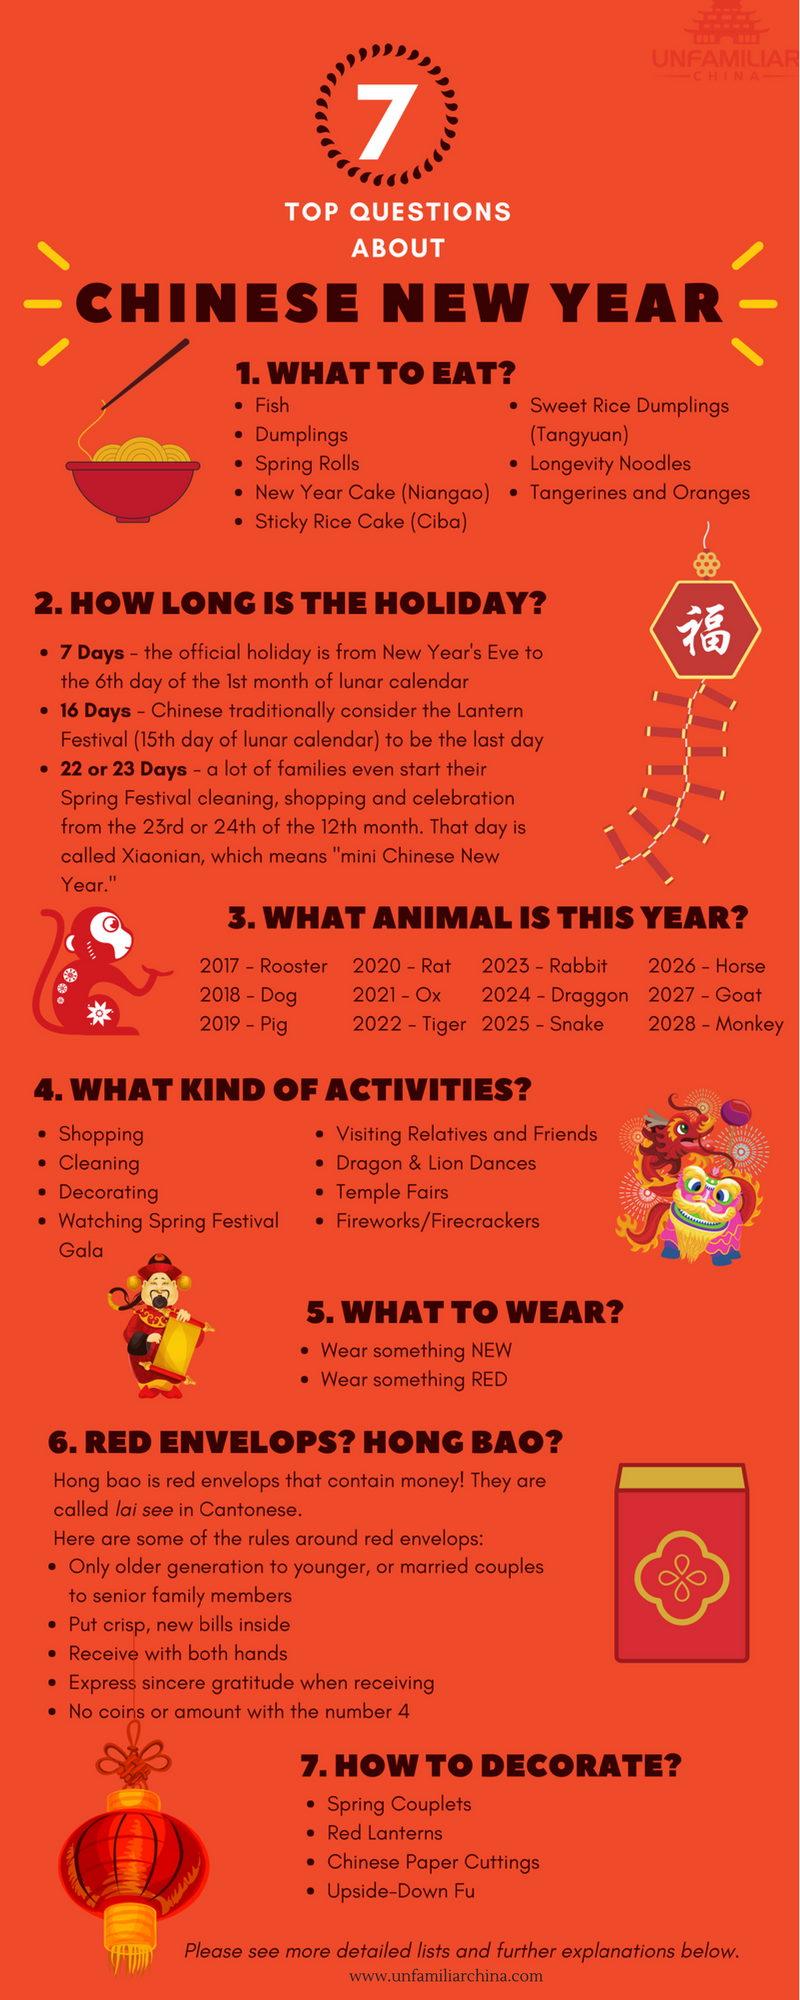 Frequently asked questions: what to wear for Chinese New Year? The